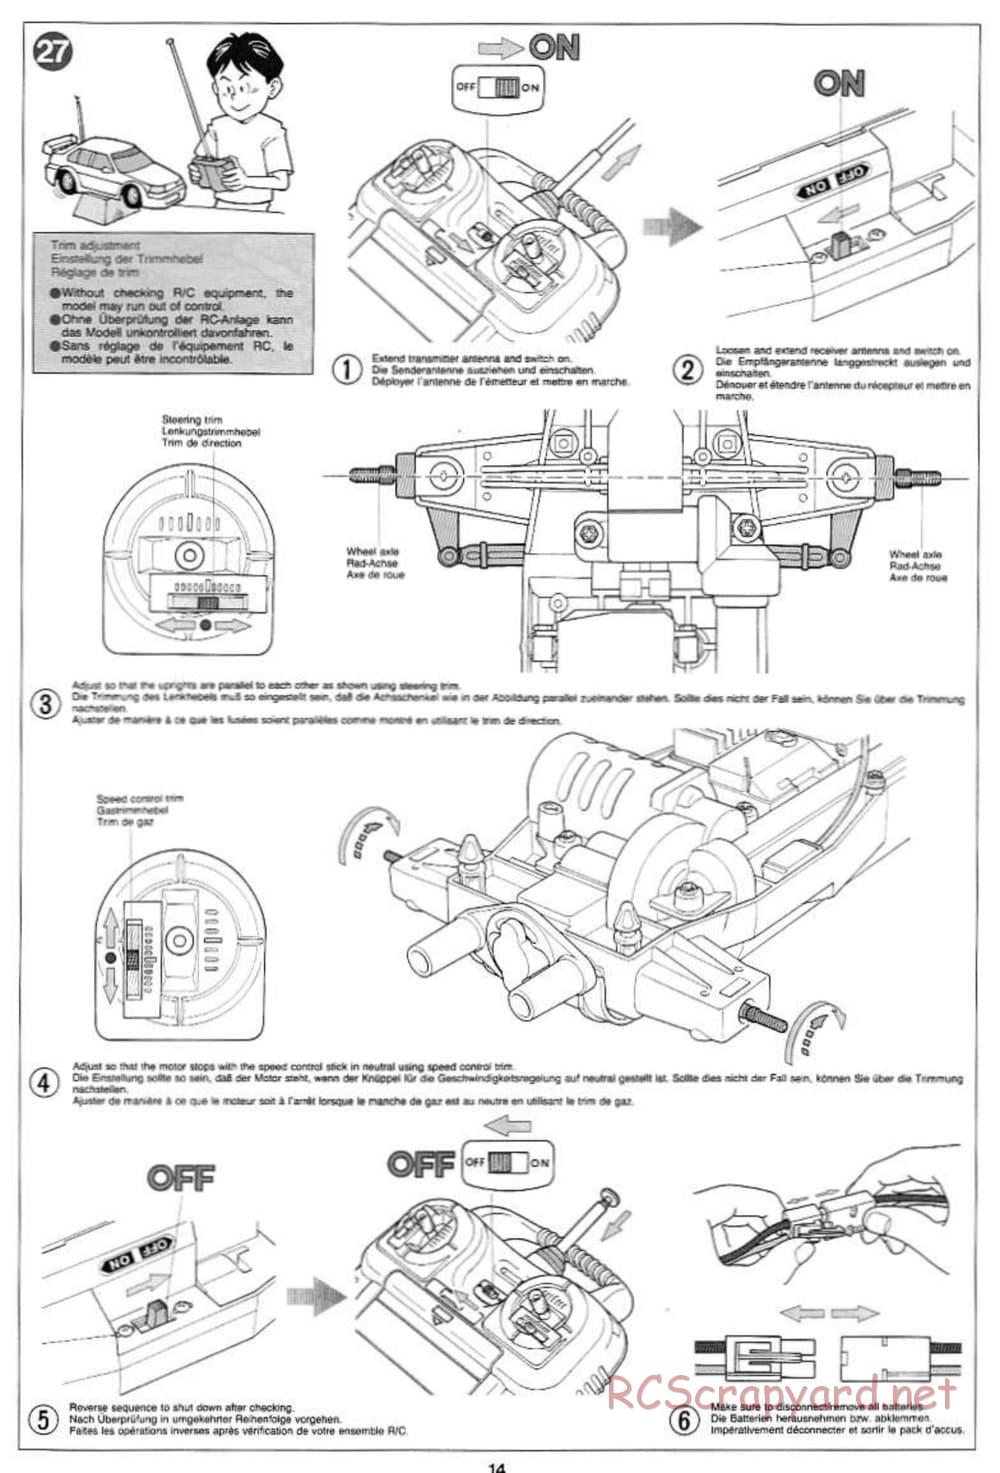 Tamiya - Wild Ceptor - Boy's 4WD Chassis - Manual - Page 14